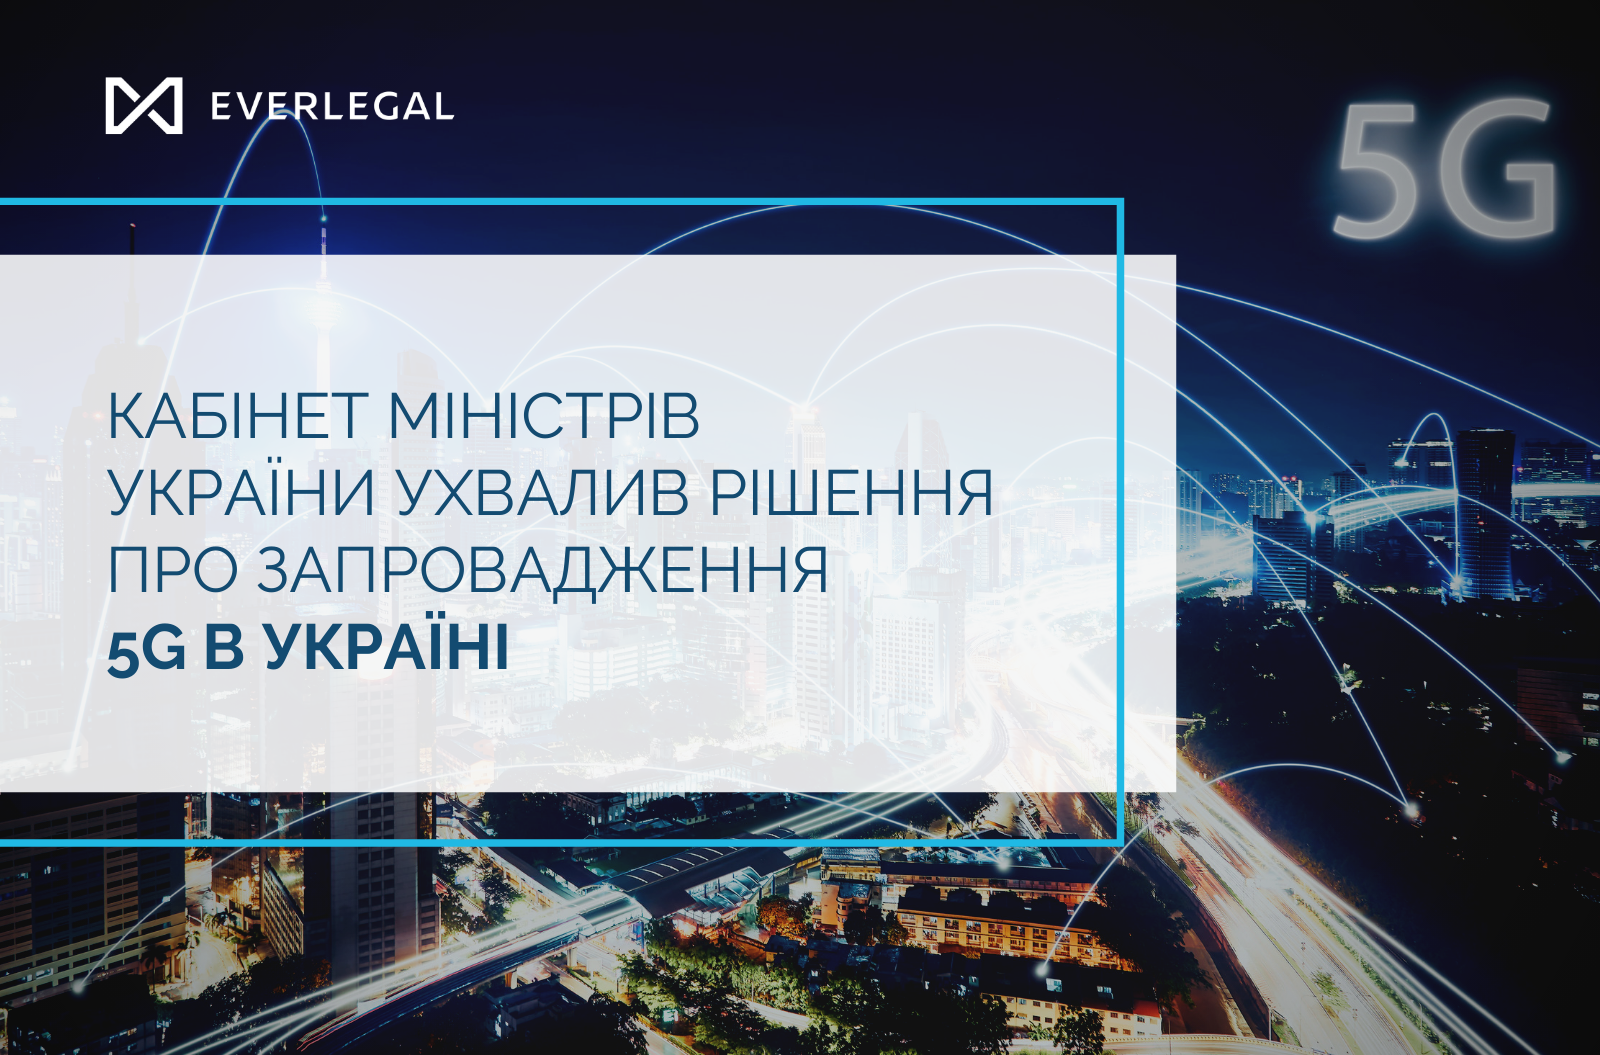 The Cabinet of Ministers of Ukraine passed a decision on introduction of 5G in Ukraine